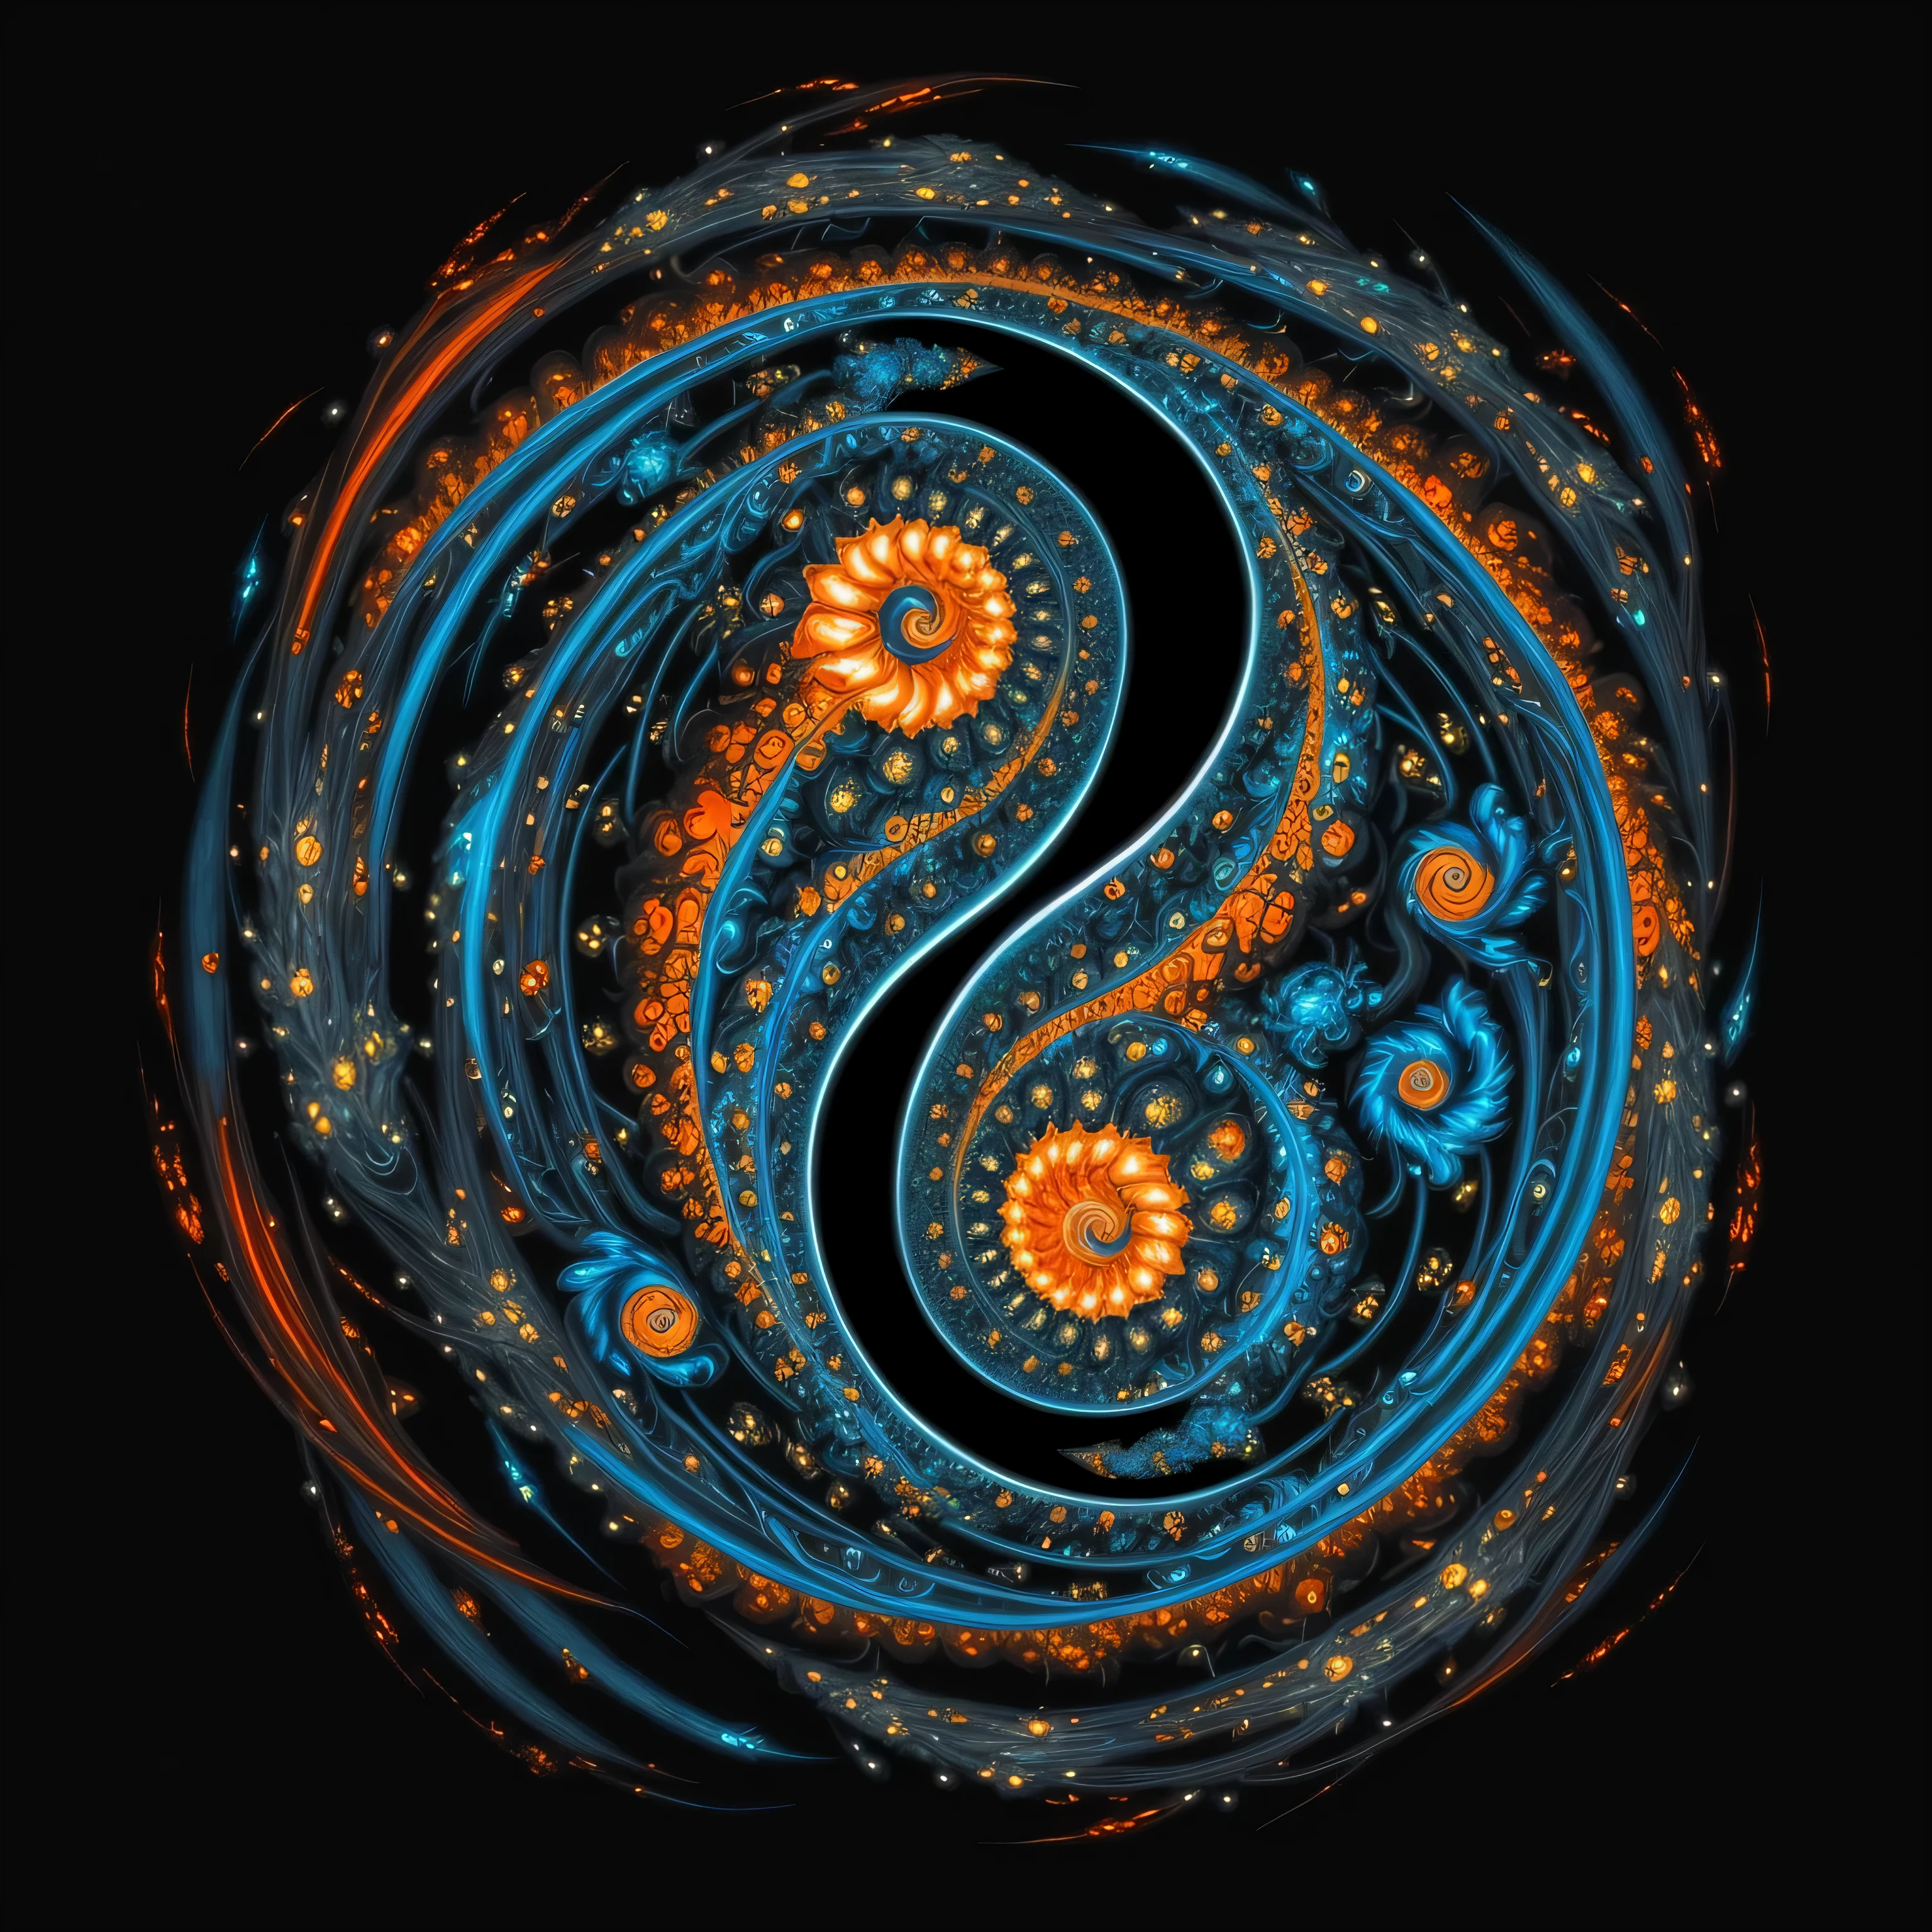  ying and yang, orange fire/blue ice duality!, yin yang, spiritual abstract forms, yinyang shaped, sacred fractal structures, fibonacci fractals, fractal elements, psytrance artwork, fractals swirling outward, cellular structure abstract style, 